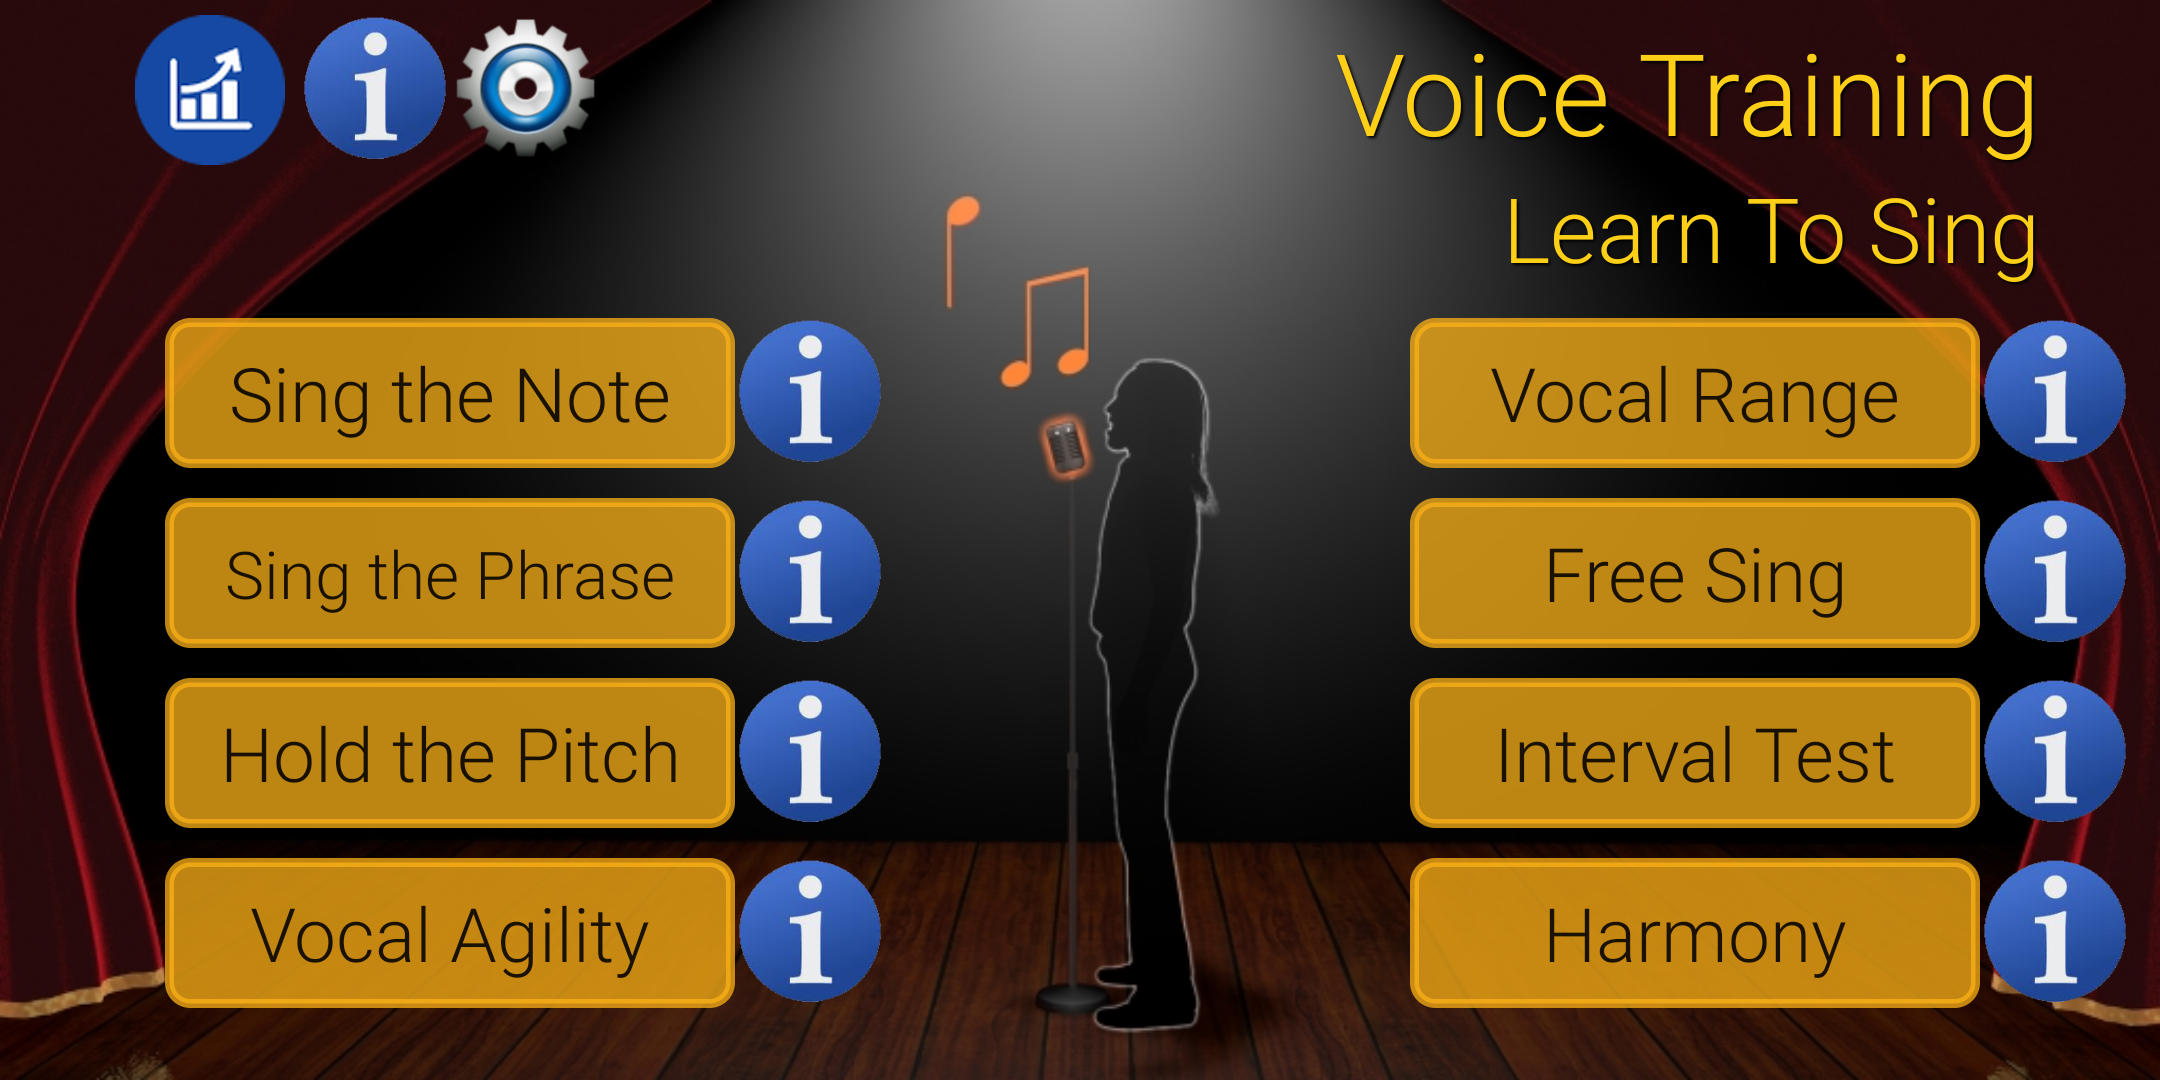 Android application Voice Training - Learn To Sing screenshort